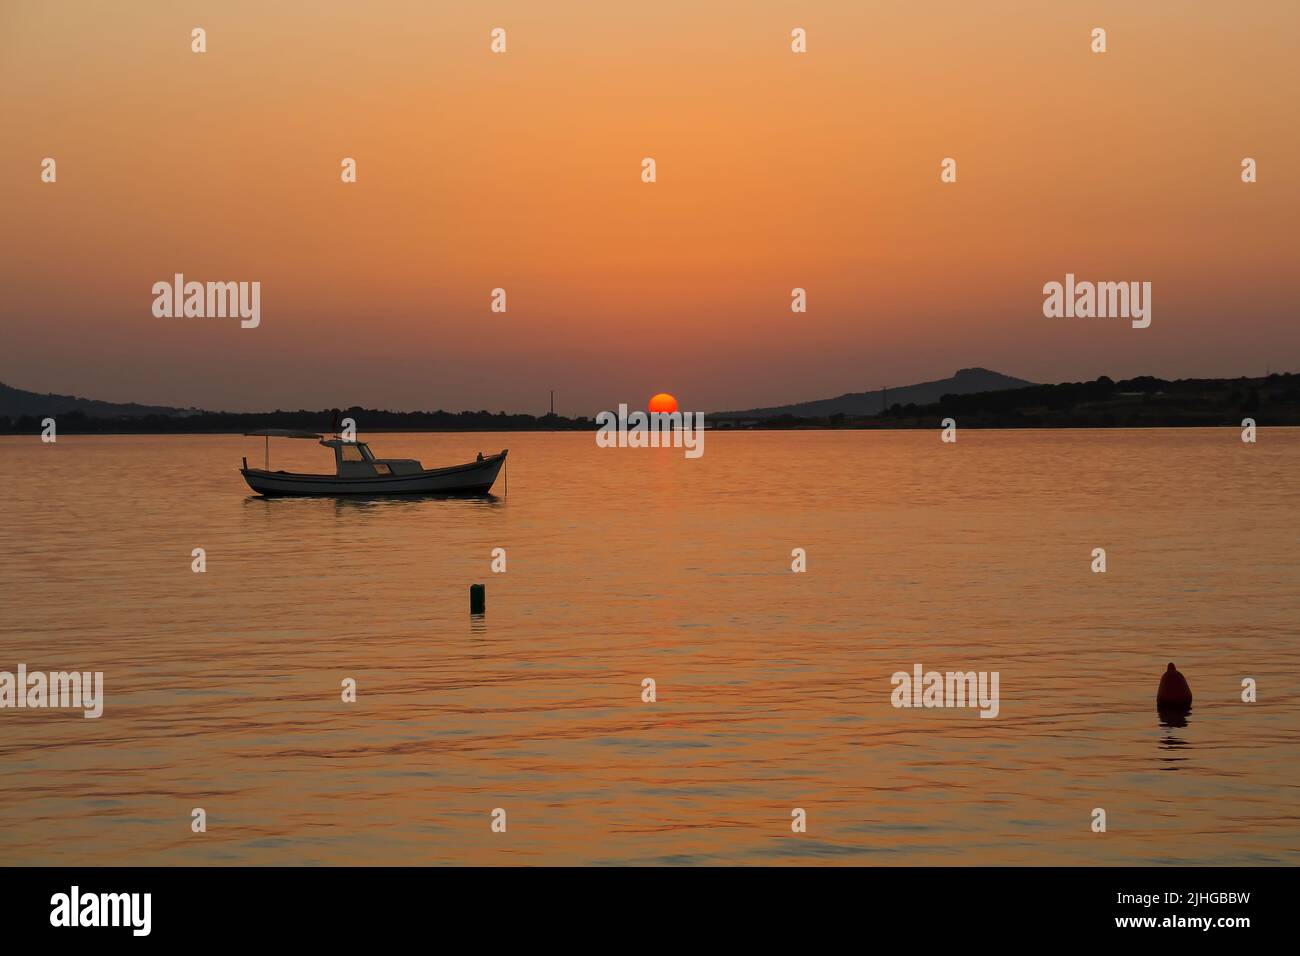 View of small, wooden fishing boat, Aegean sea and landscape at sunset captured in Ayvalik area of Turkey in summer. Beautiful scene. Stock Photo